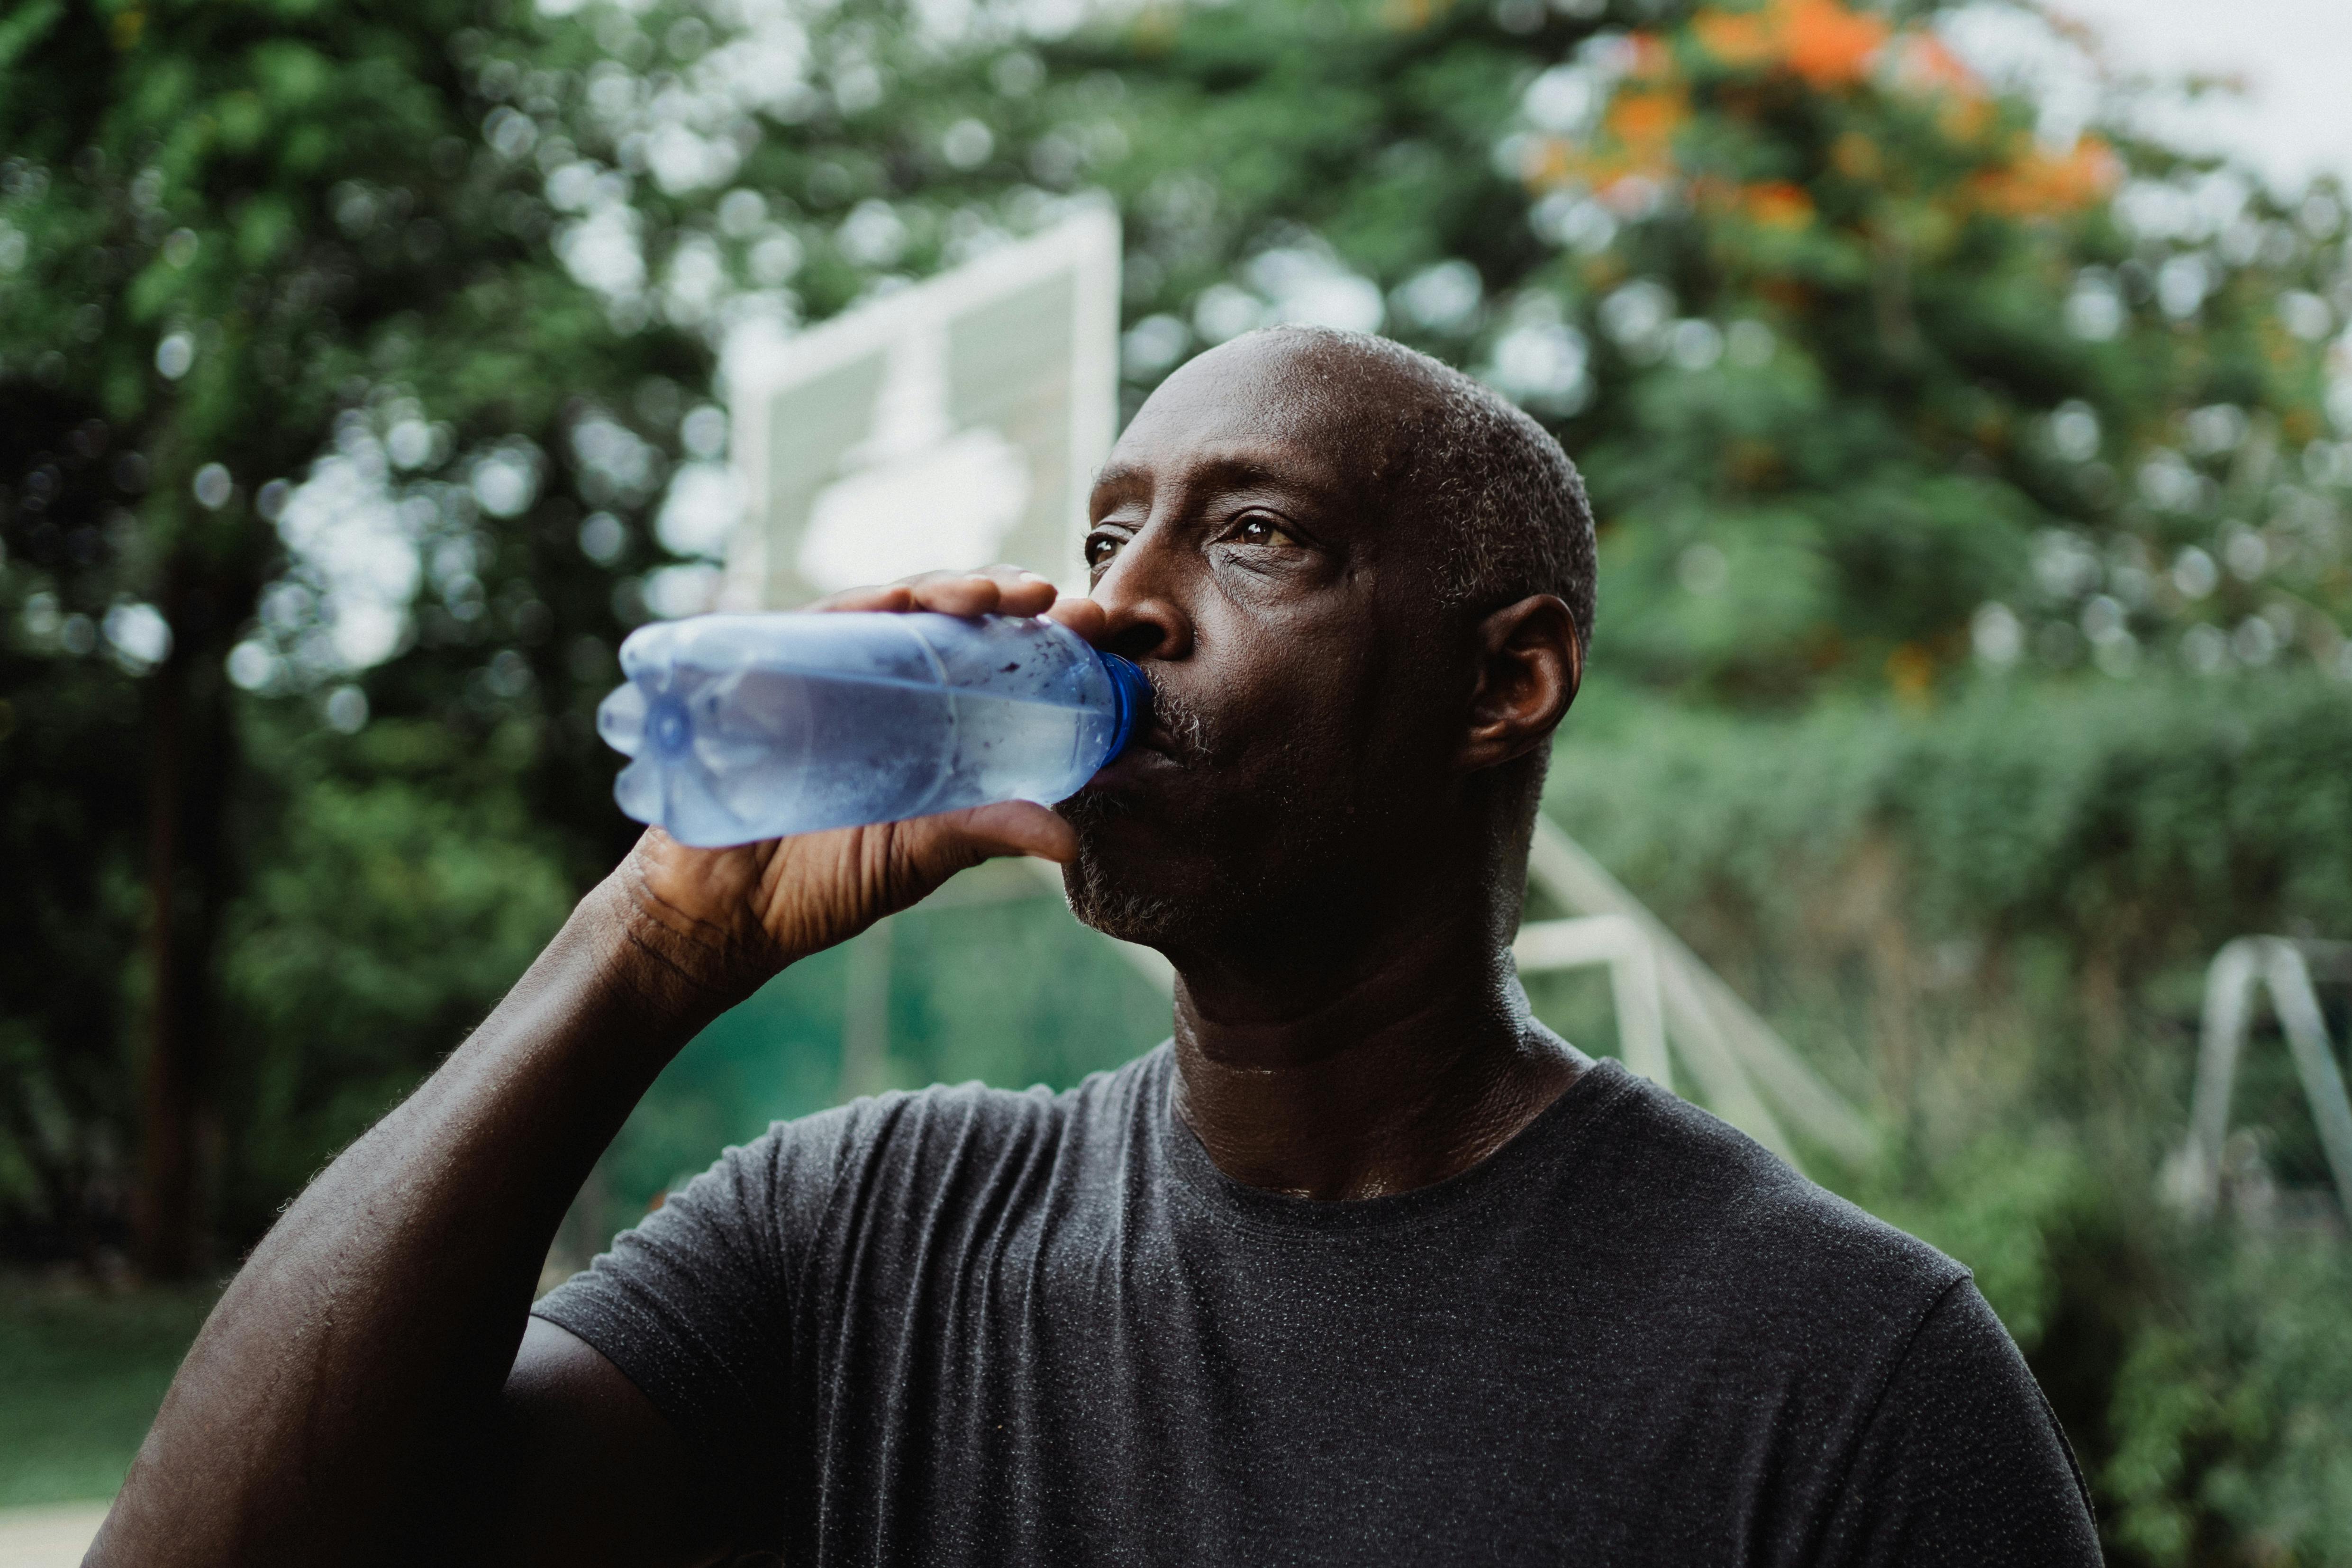 Man drinking from water bottle - Stock Image - F023/1234 - Science Photo  Library